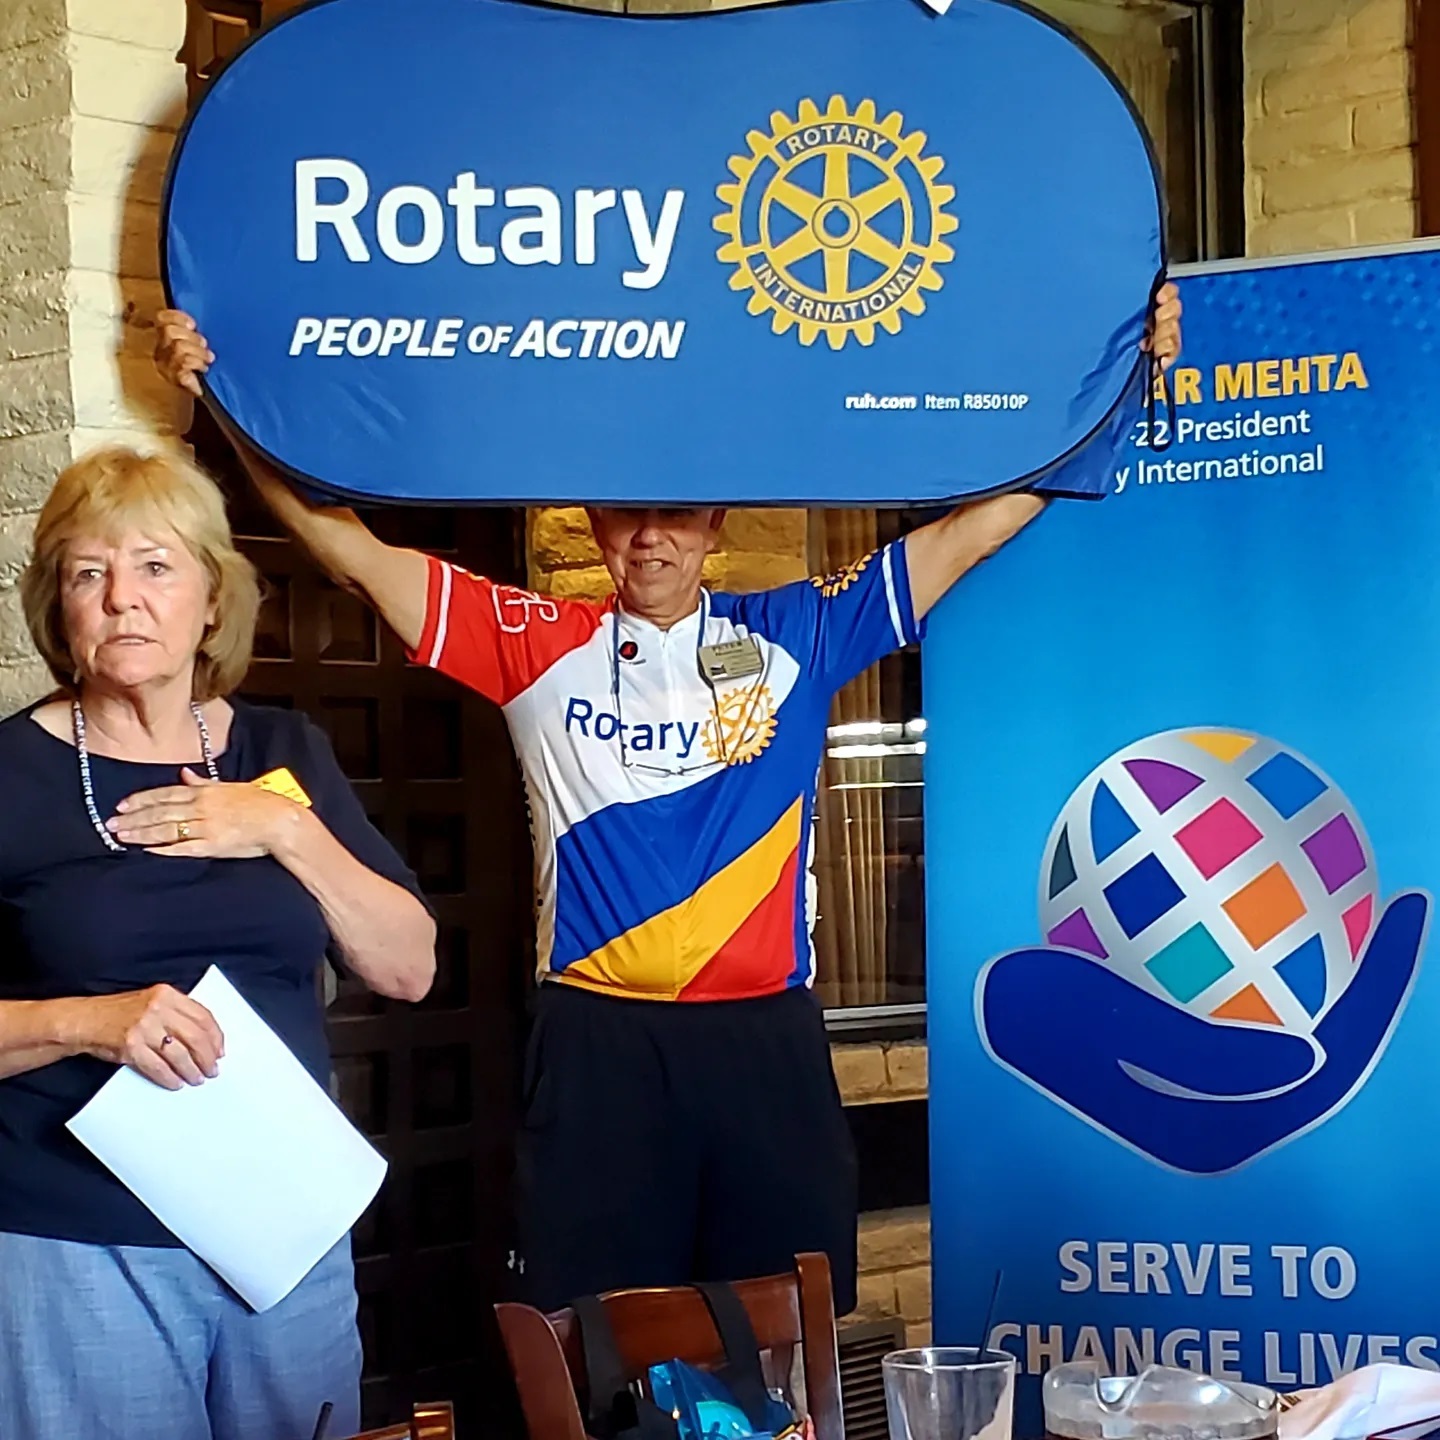 Rotary Club of Nogales – People of Action